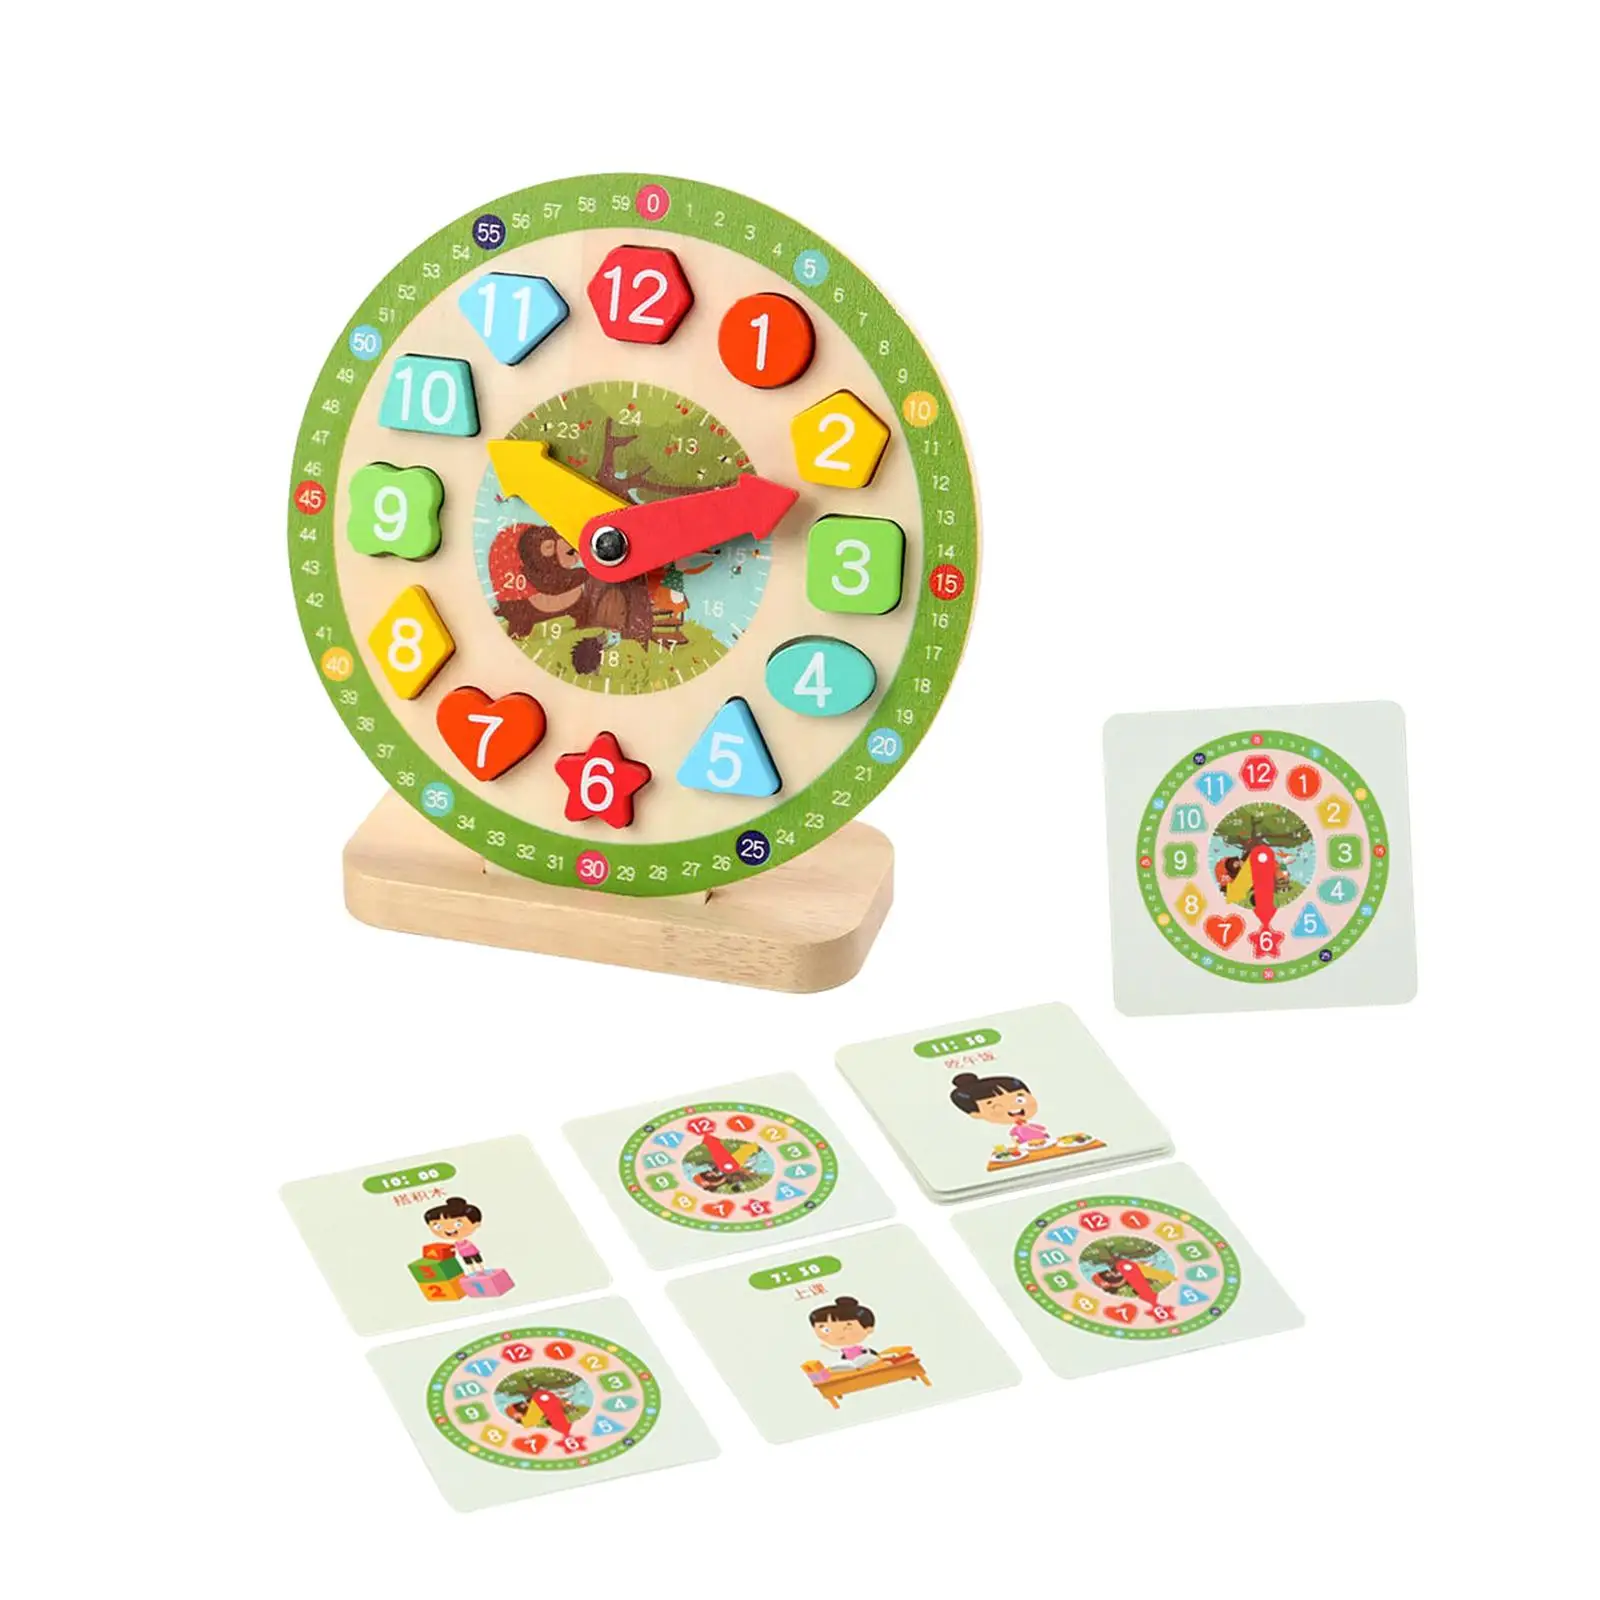 Clock Learning Wooden Time Learning Teaching Aid for Homeschool Supplies Clocks Practice Learning Activities for 3+ Years Old